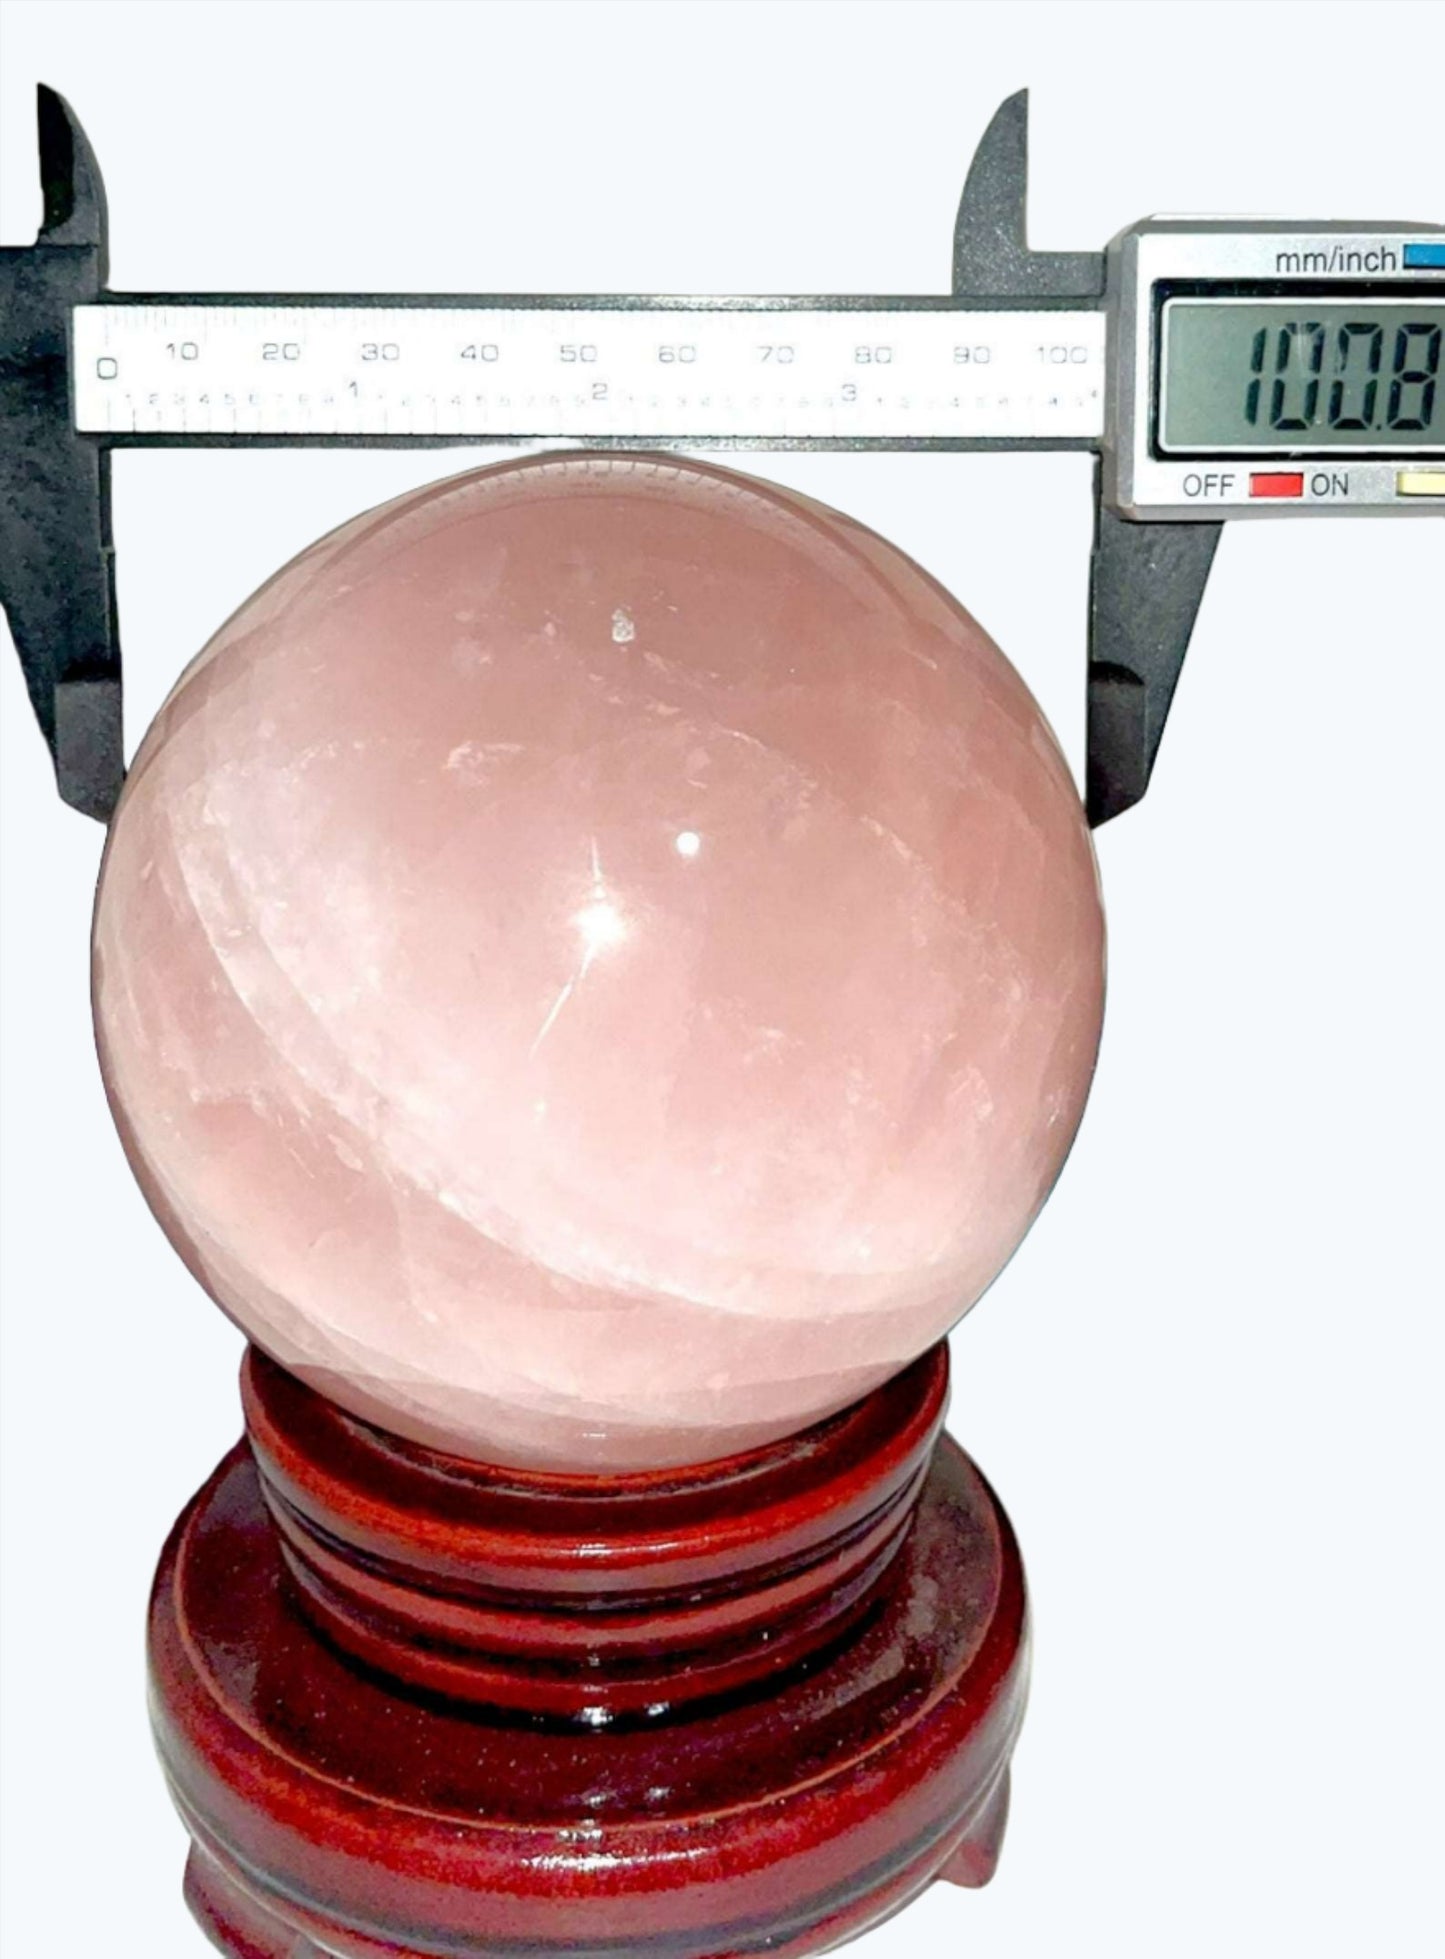 AA Quality Rose Quartz crystal large 100.8 mm sphere almost 4 lbs w/ spinning stand. Hold, meditate, feel the loving energy.